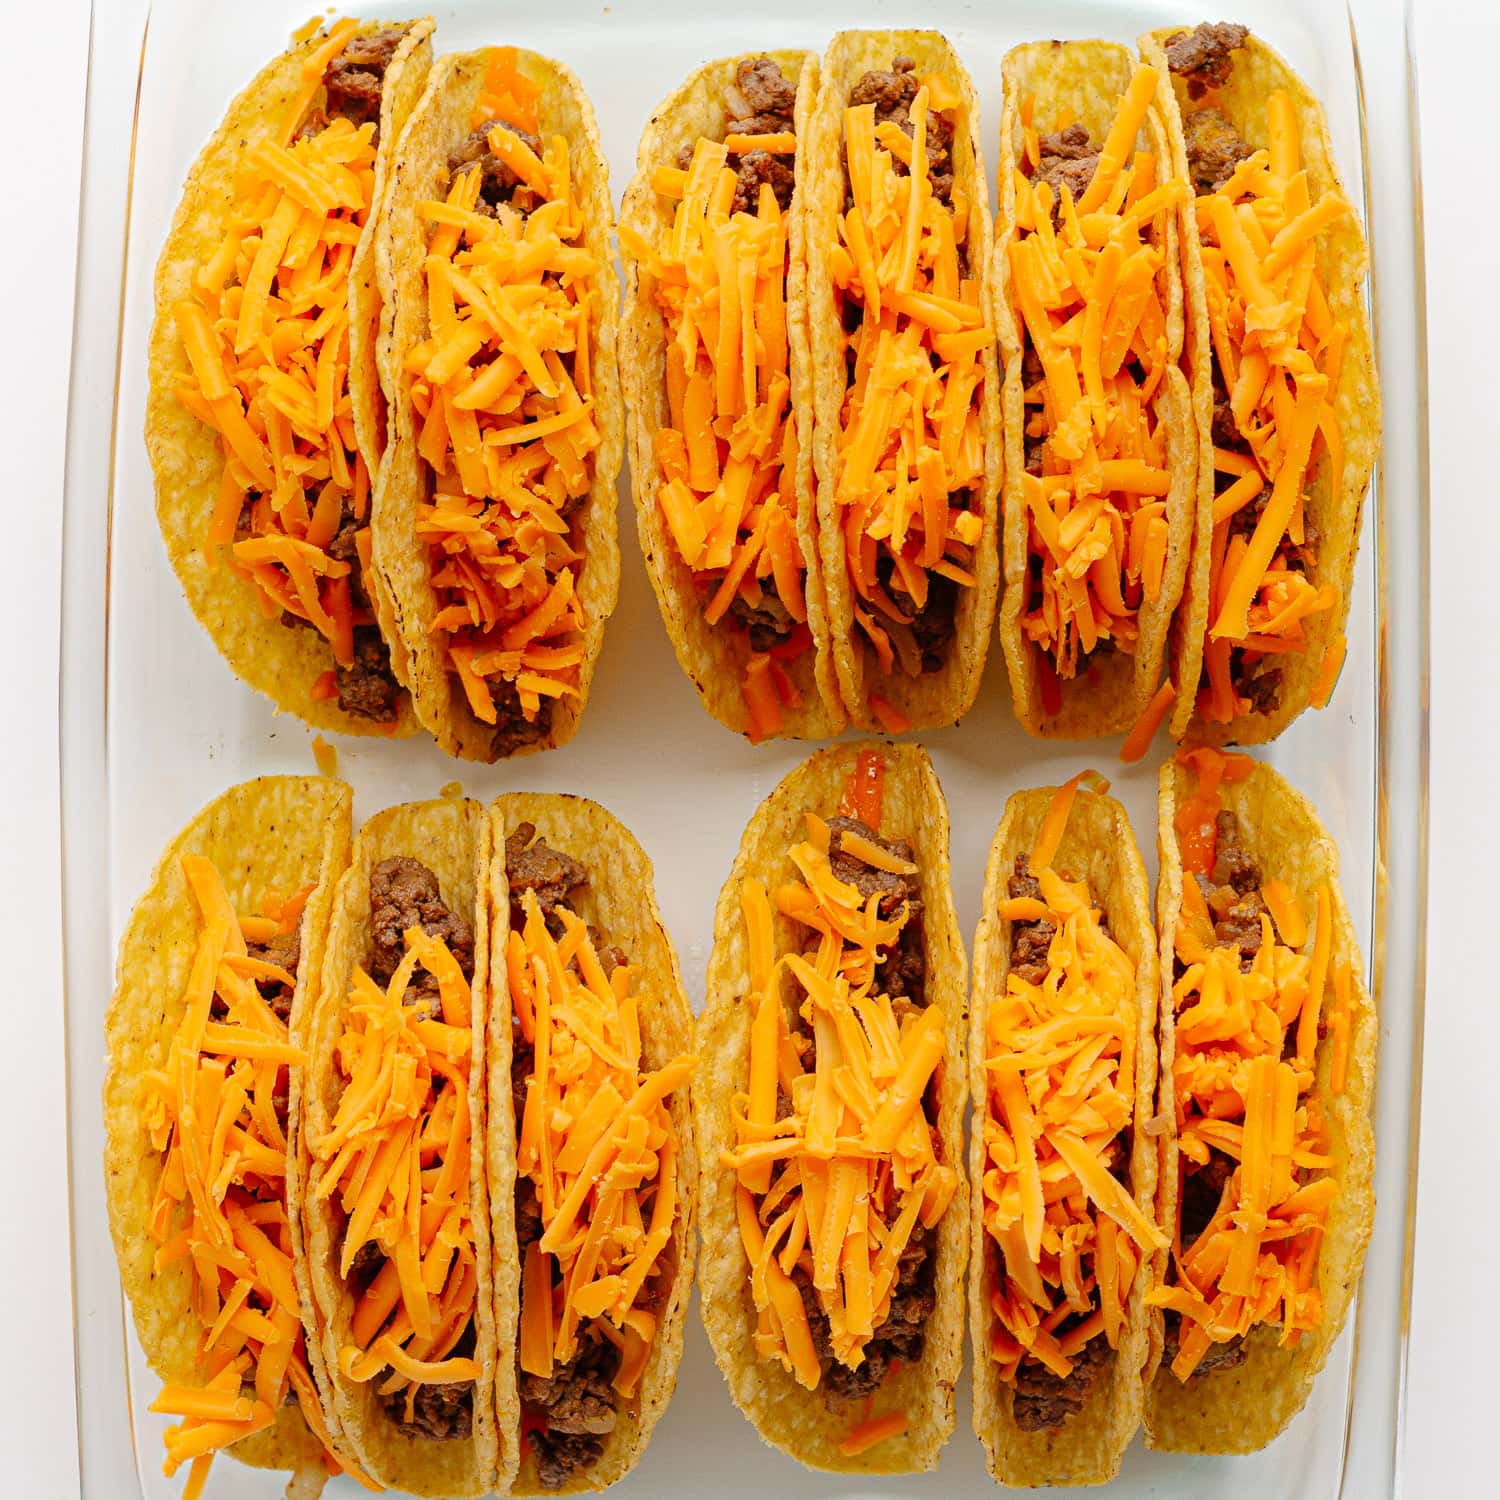 Assembled cheeseburger tacos in a baking dish ready to be baked.